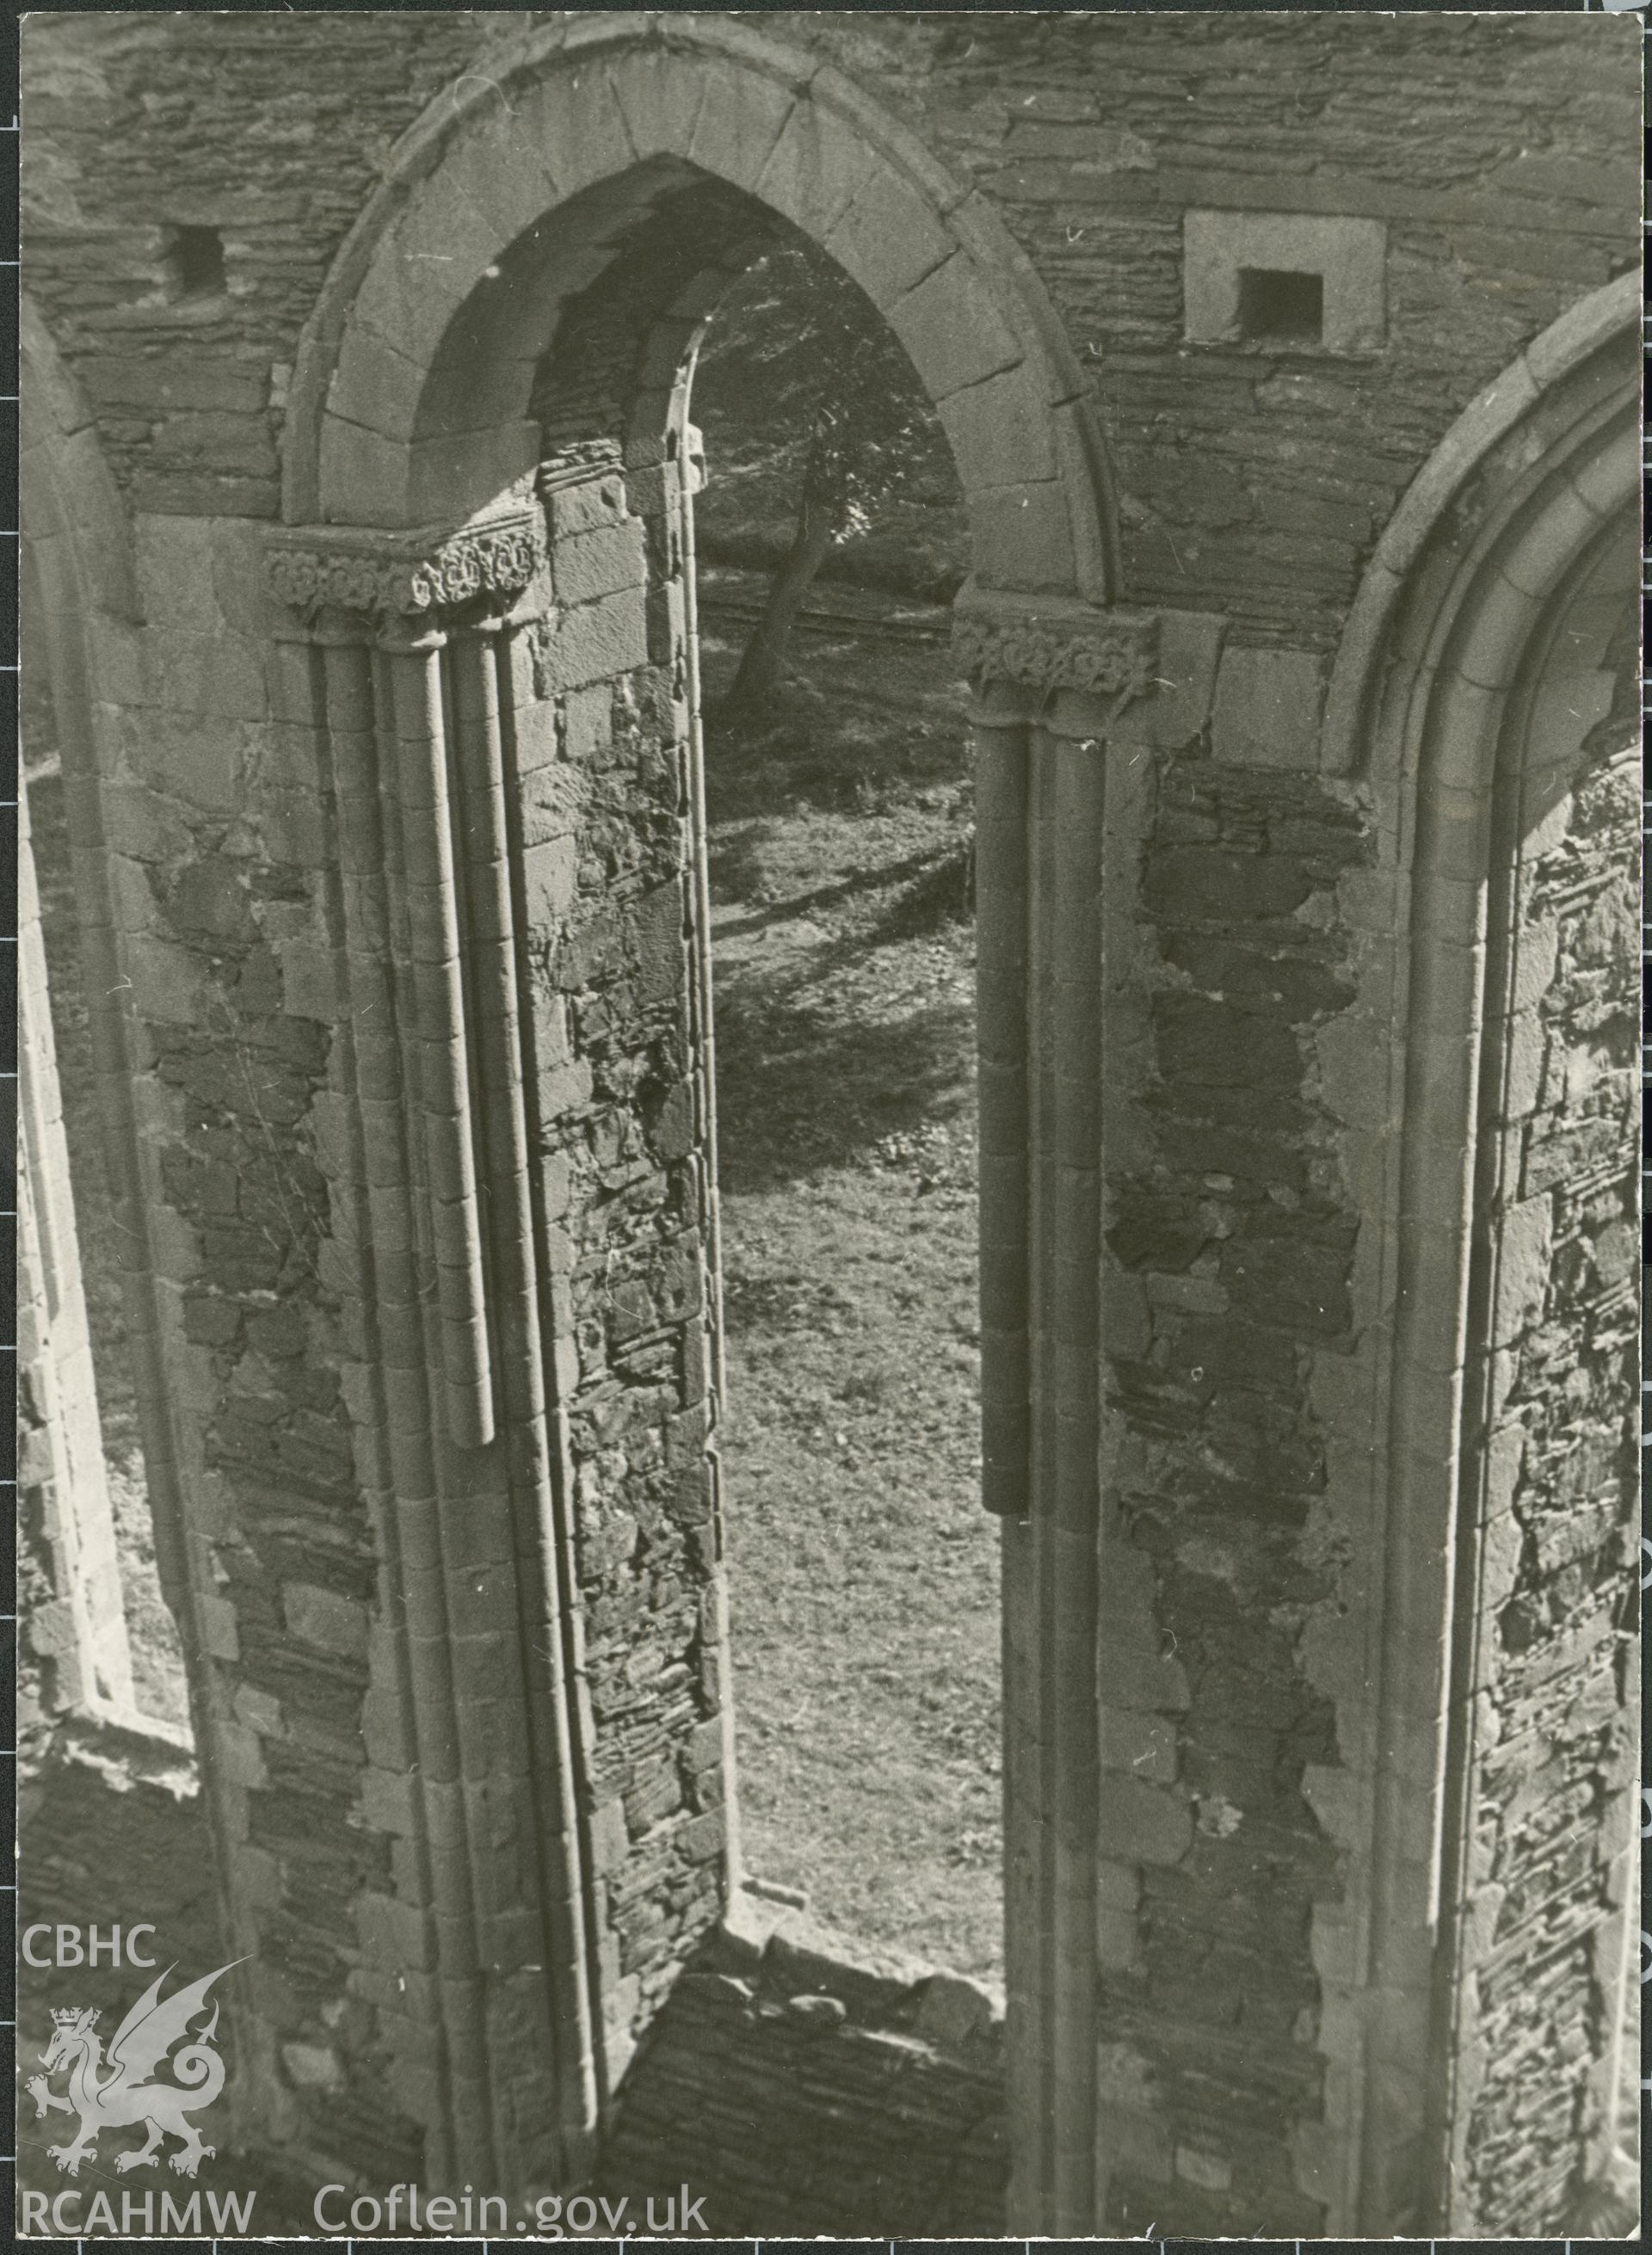 A black and white print showing detail of Valle Crucis Abbey, near Llangollen. No negative